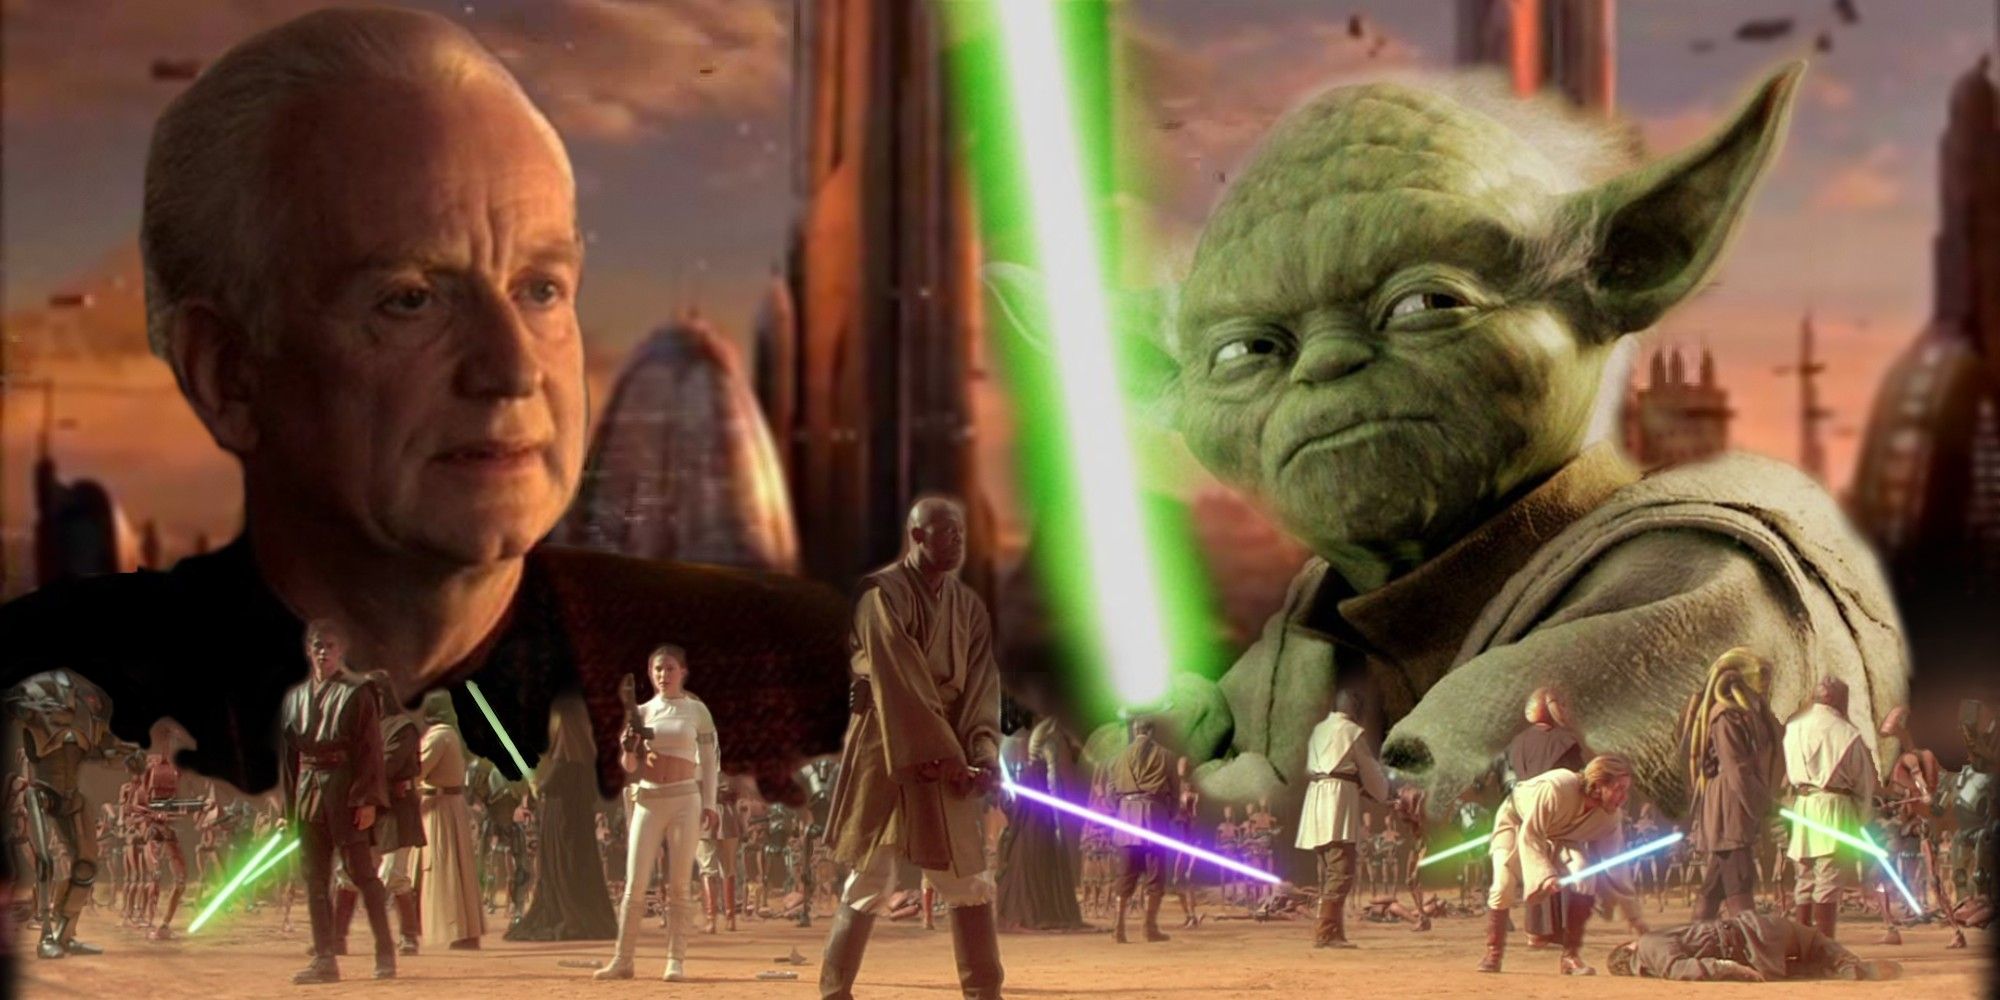 Palpatine and Yoda in the Star Wars prequels